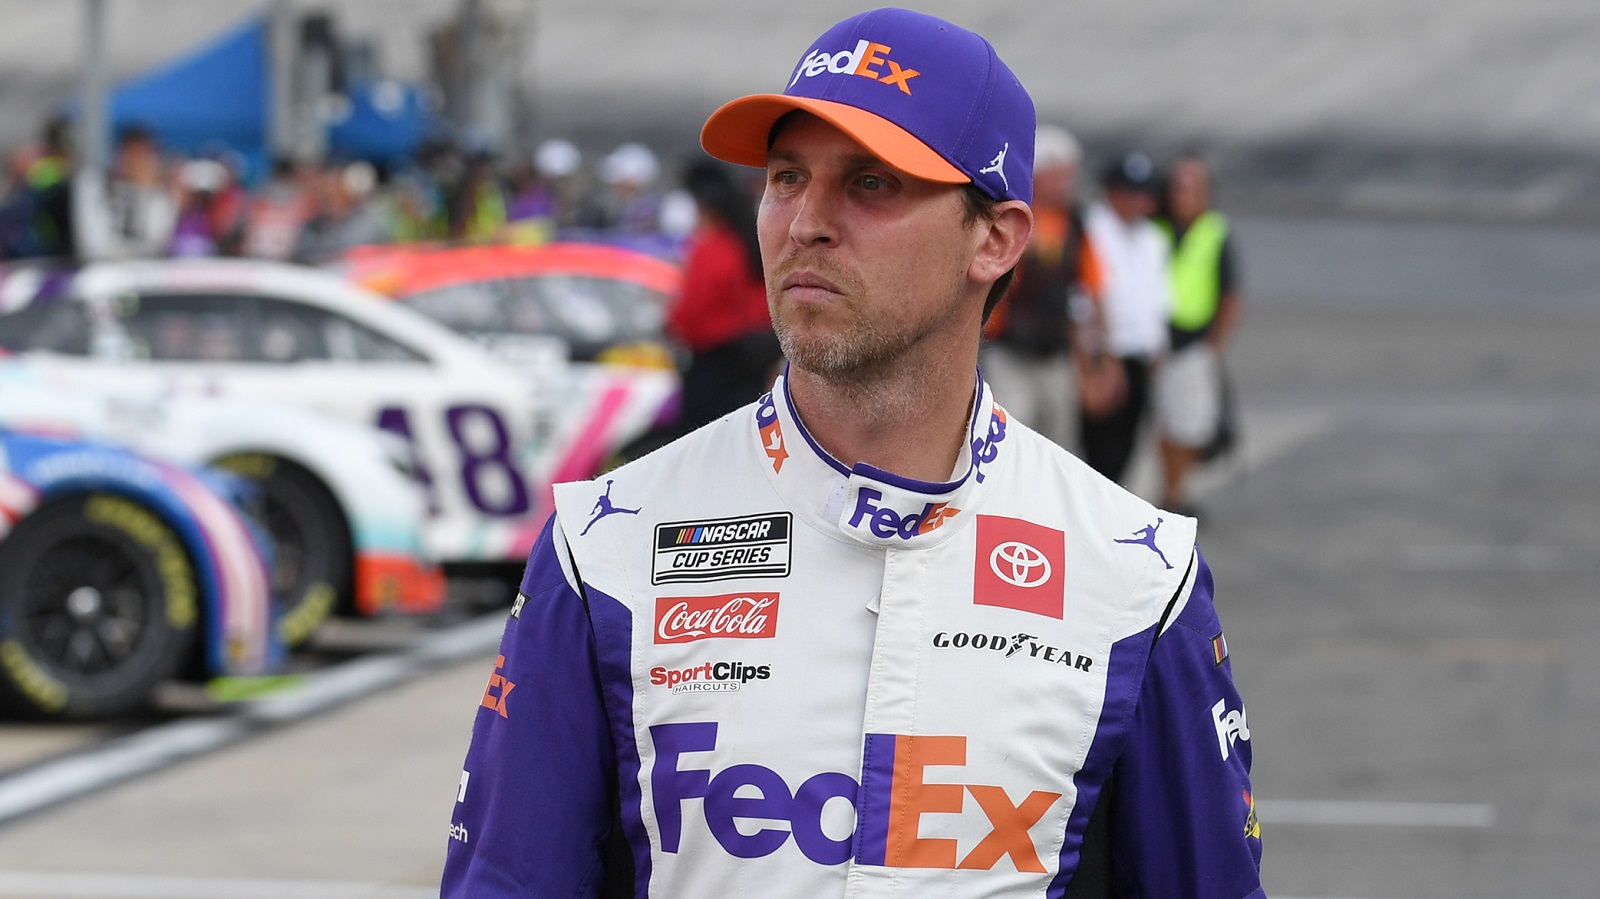 Denny Hamlin walks down pit road during qualifying for the NASCAR Cup Series Bass Pro Shops Night Race on Sept. 16, 2022, at Bristol Motor Speedway. | Jeffrey Vest/Icon Sportswire via Getty Images